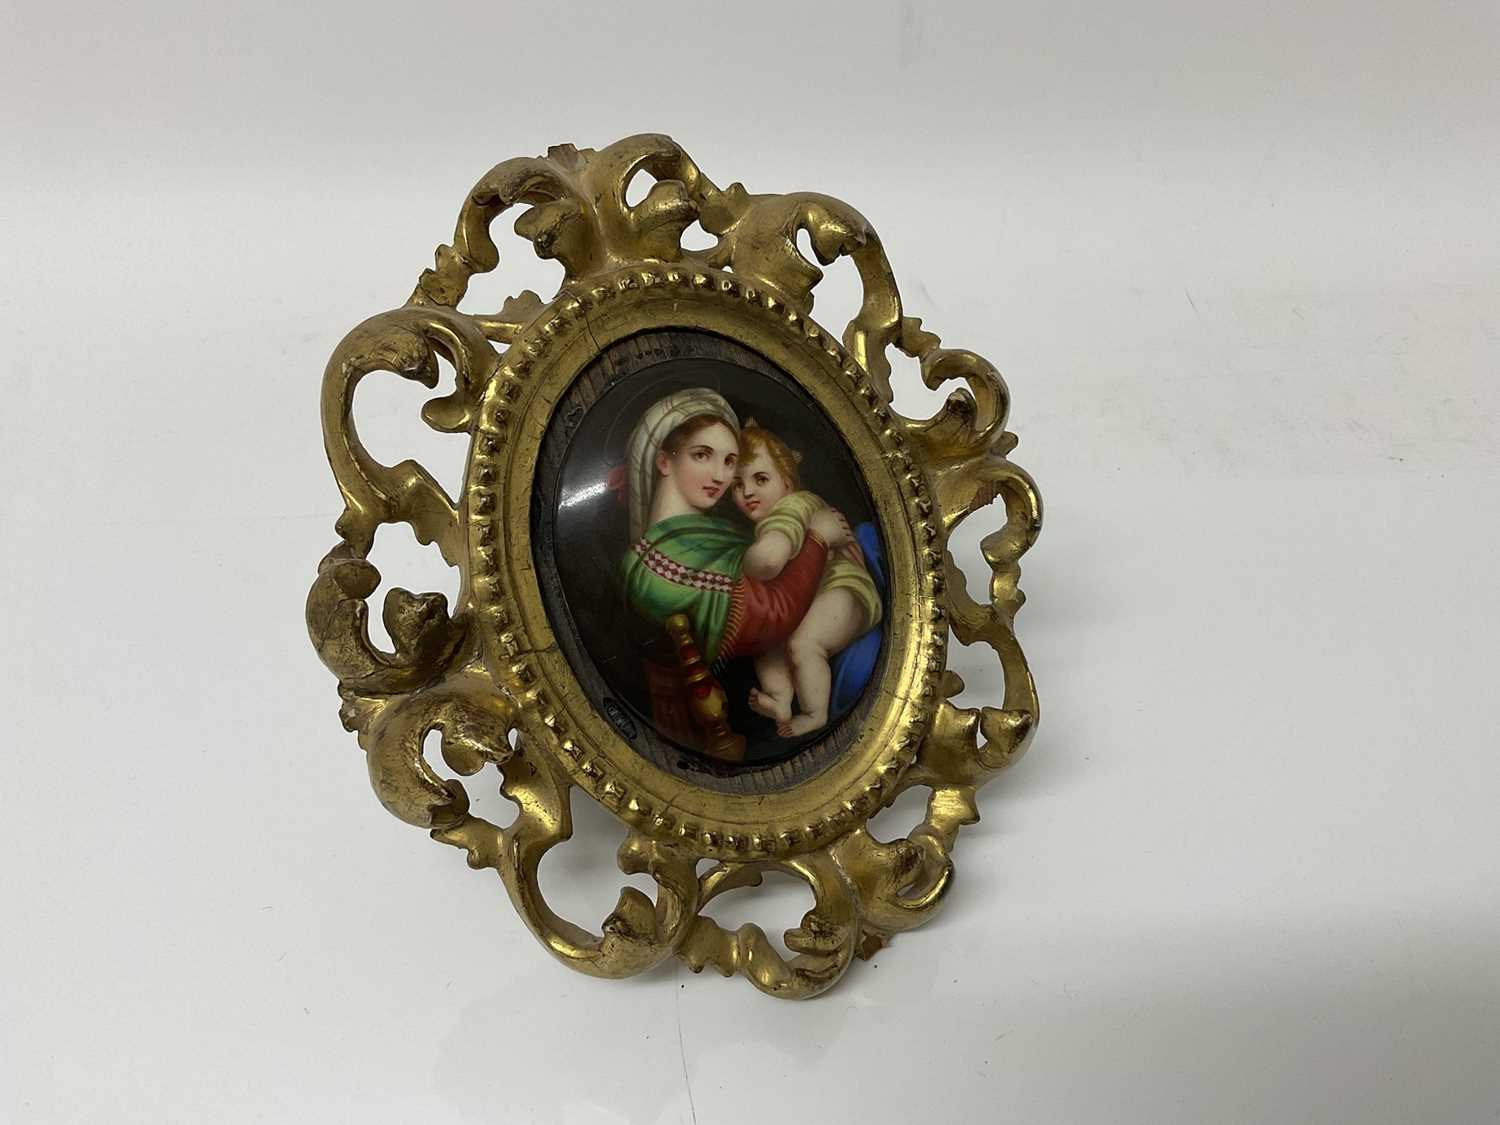 Lot 61 - 19th century Italian porcelain plaque depicting the Madonna & Child in giltwood frame